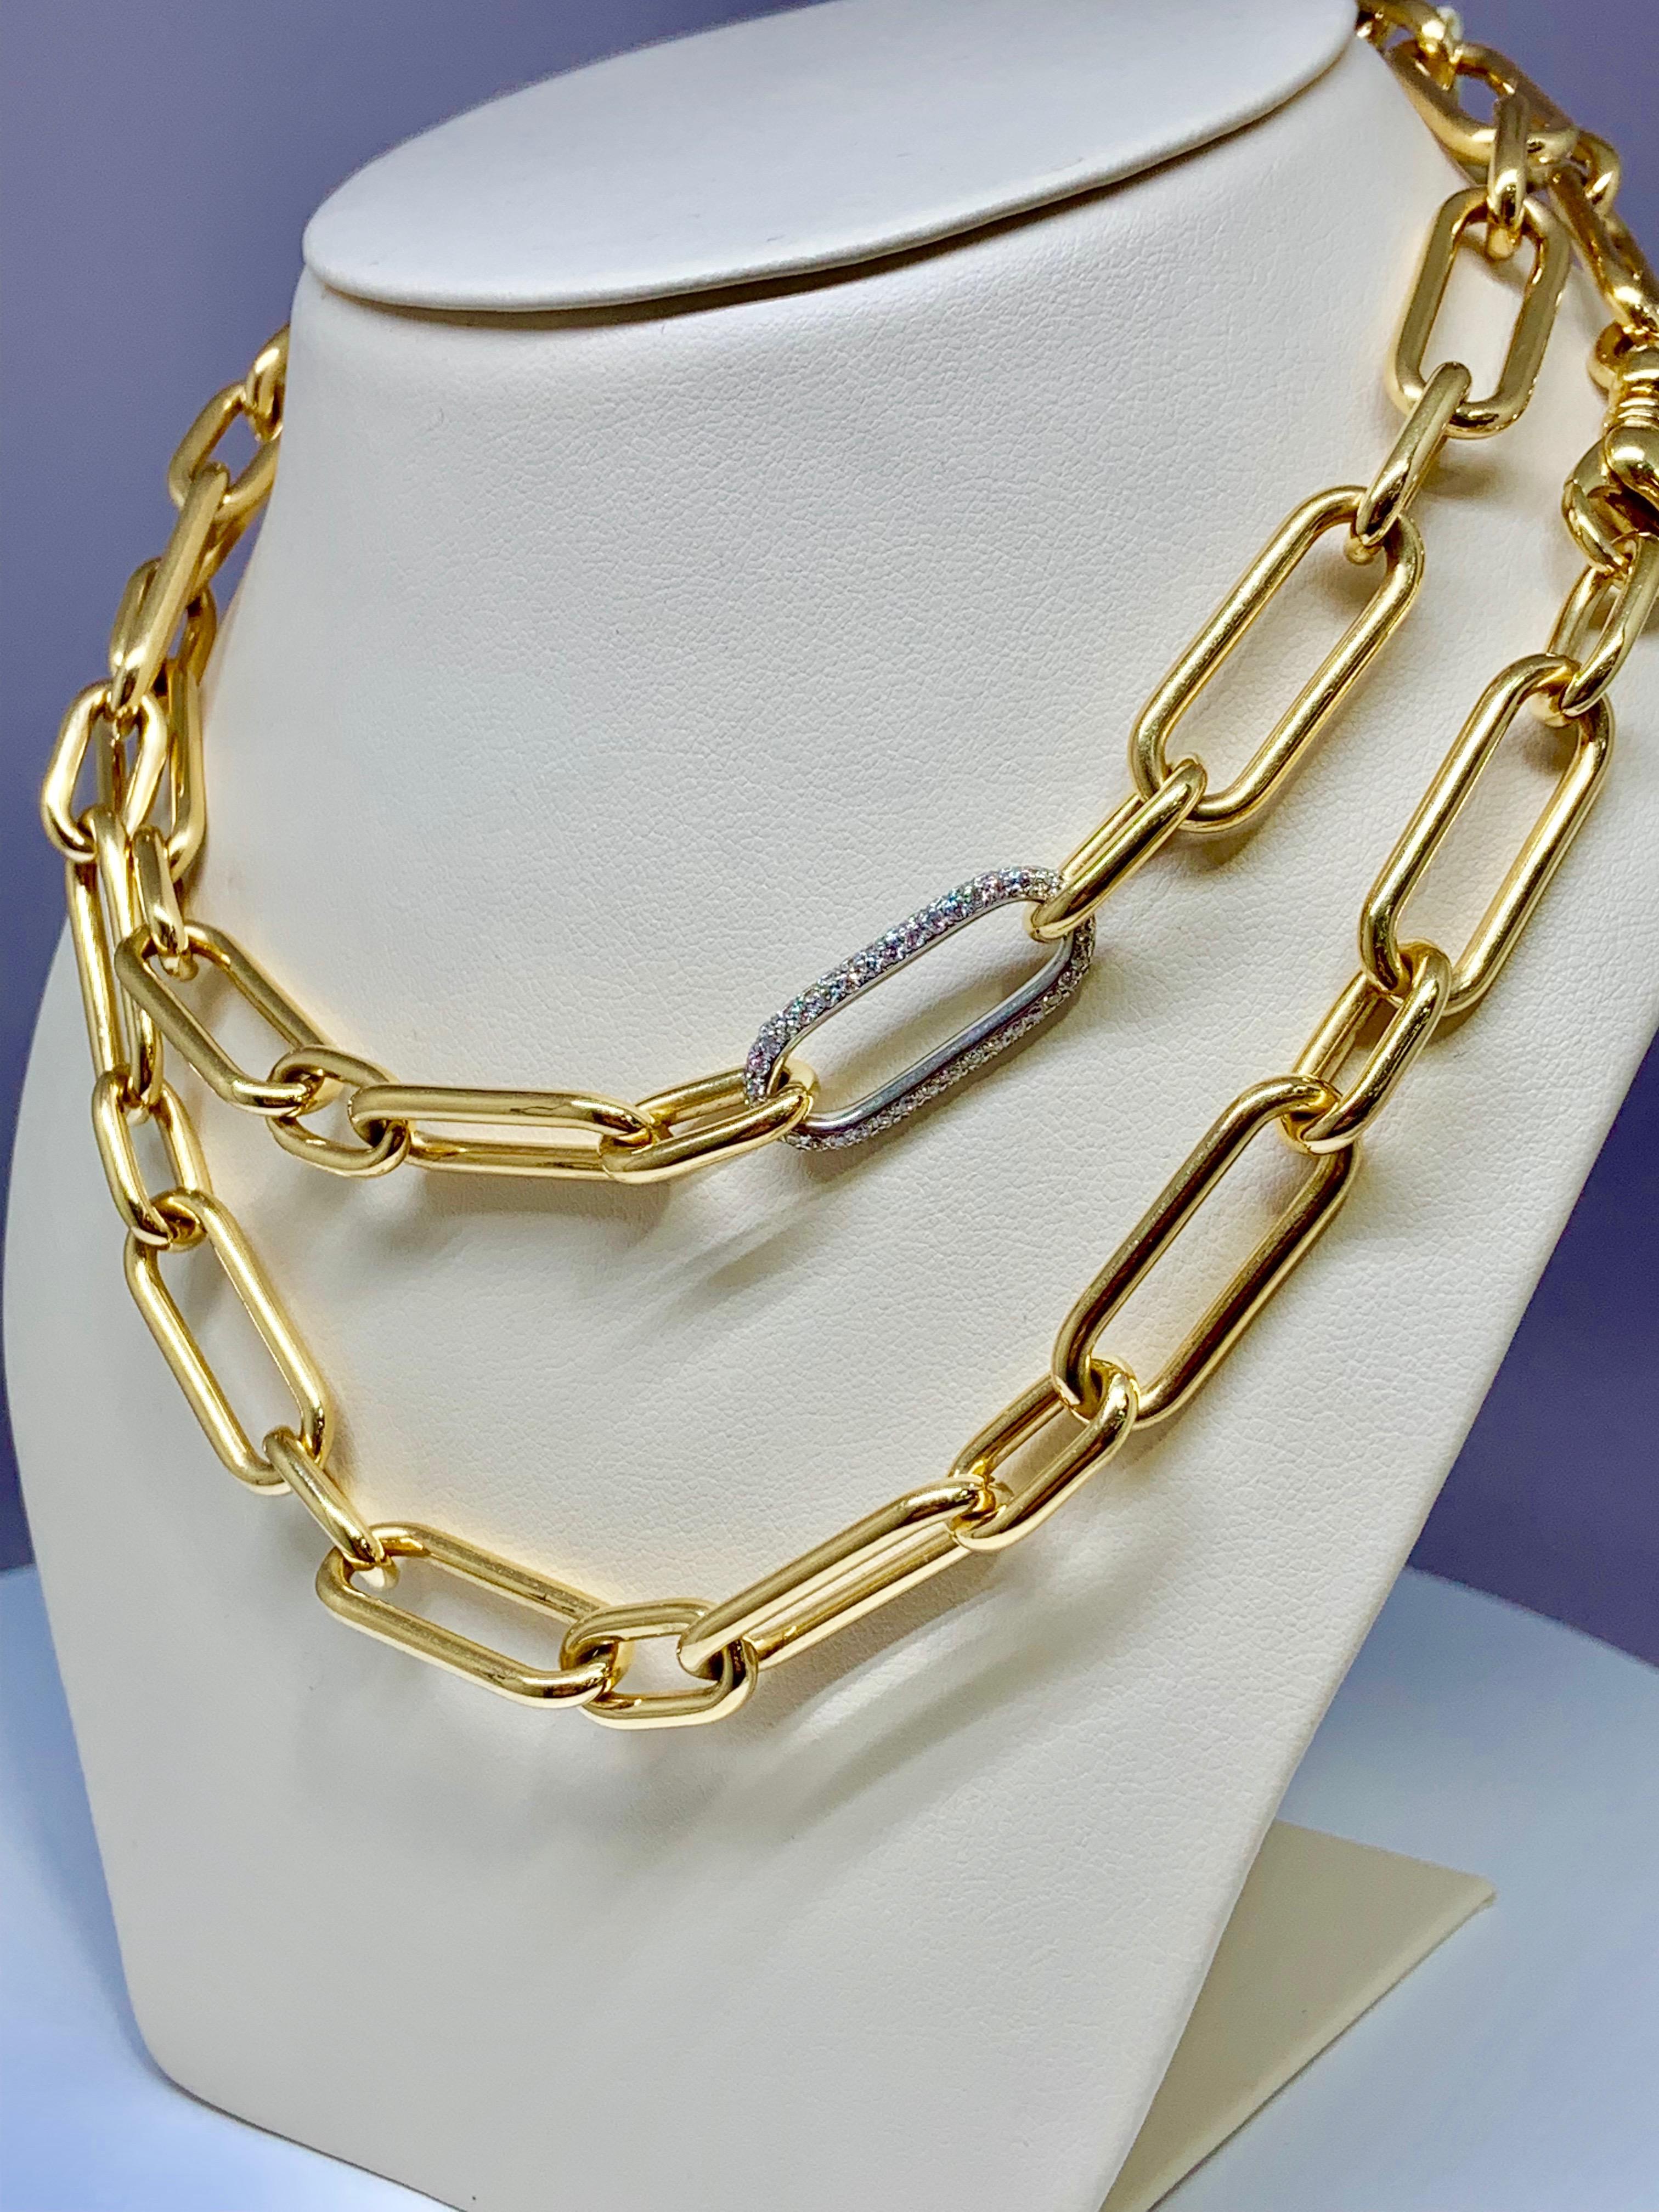 This DA Gold chain link necklace is 31.5